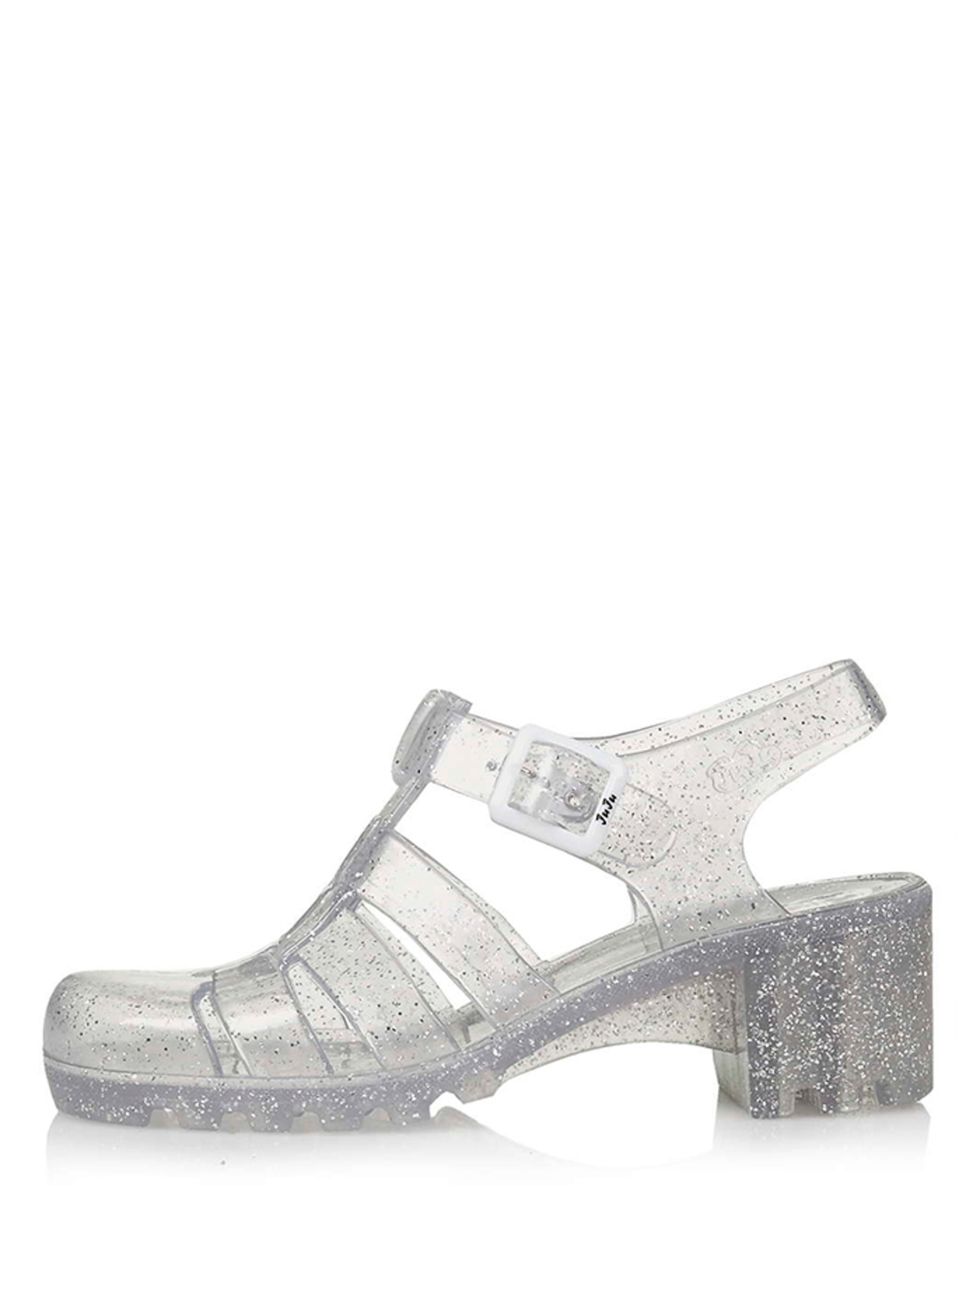 <p>Not into the trainers and skirt combination? Jelly Sandals are just genius for slipping on during your work commute. (These one&rsquo;s are only &pound;7) <a href="http://www.topshop.com/webapp/wcs/stores/servlet/ProductDisplay?langId=-1&amp;storeId=12